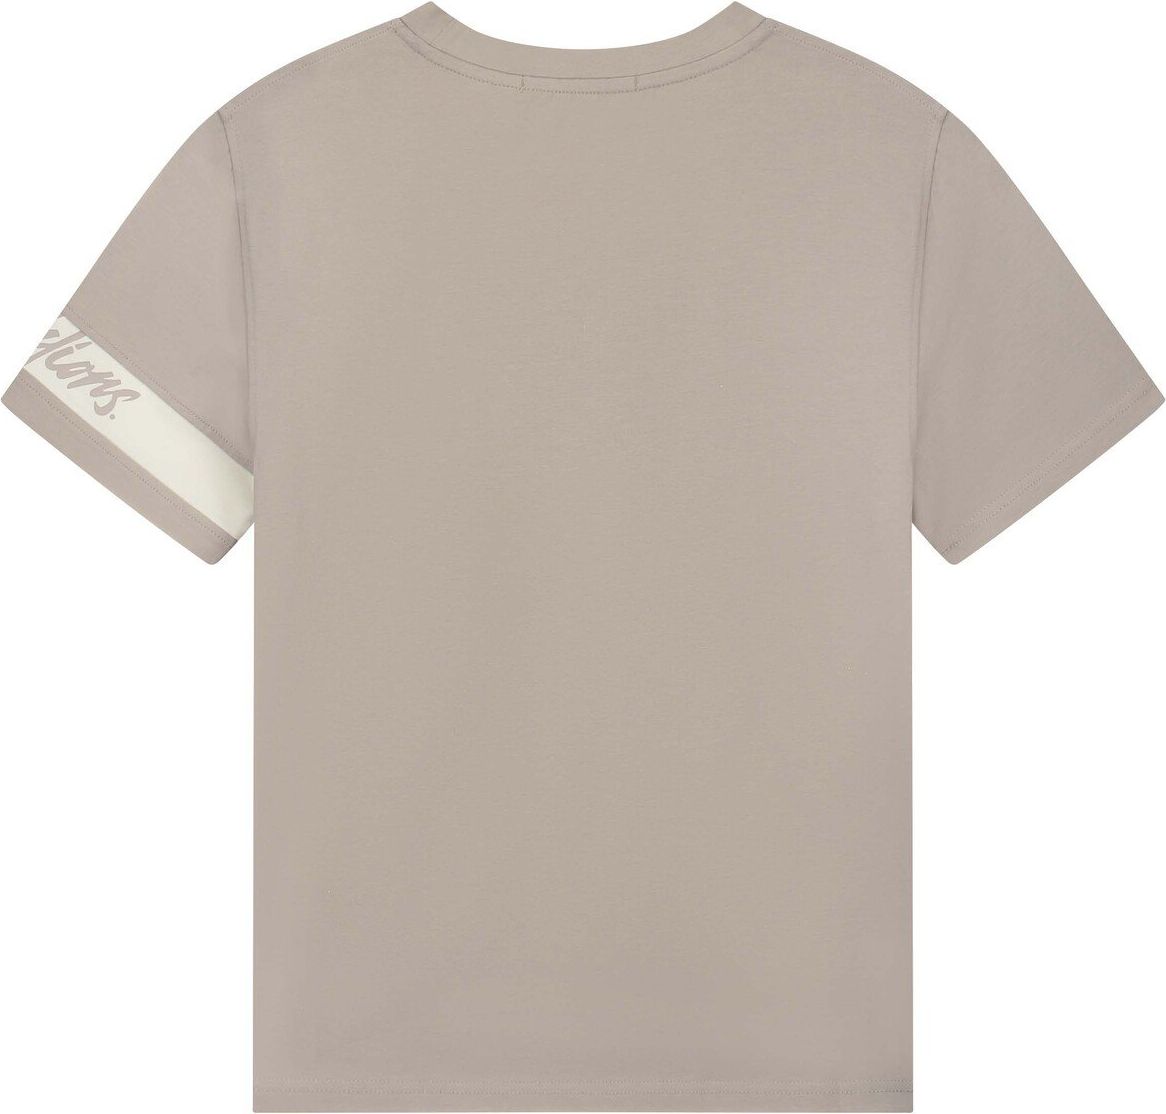 Malelions Women Captain T-Shirt - Taupe/Off-W Bruin